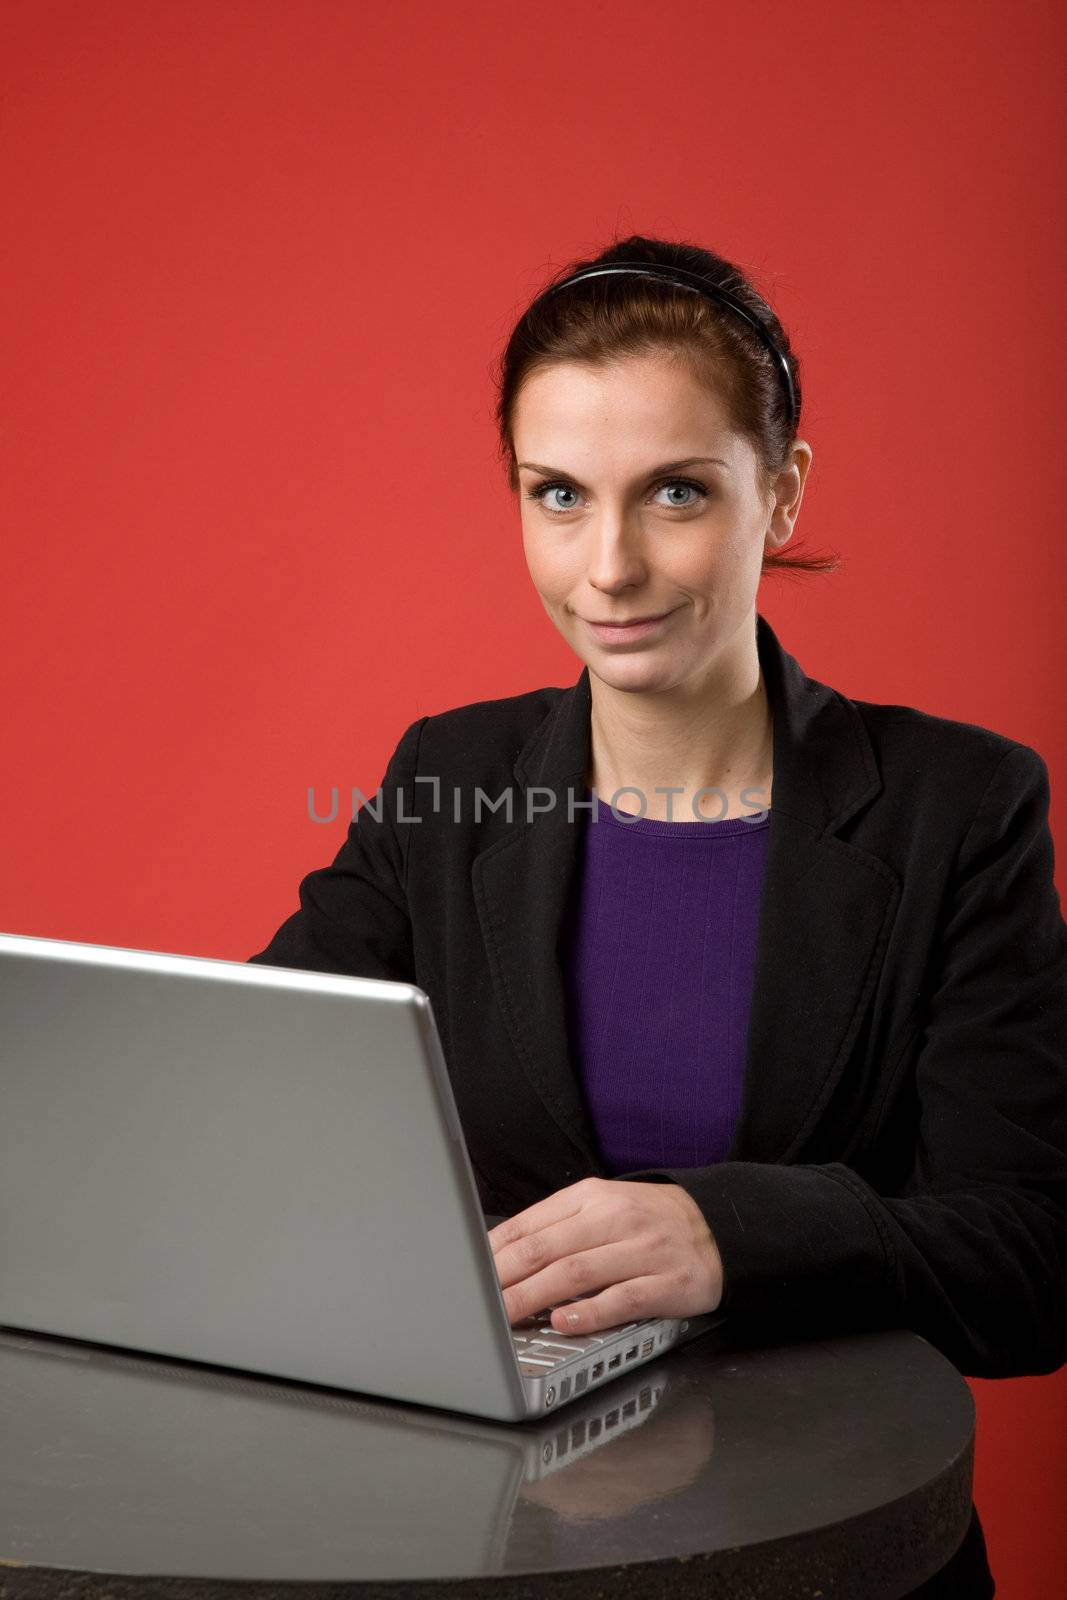 Young Woman using Laptop by leaf